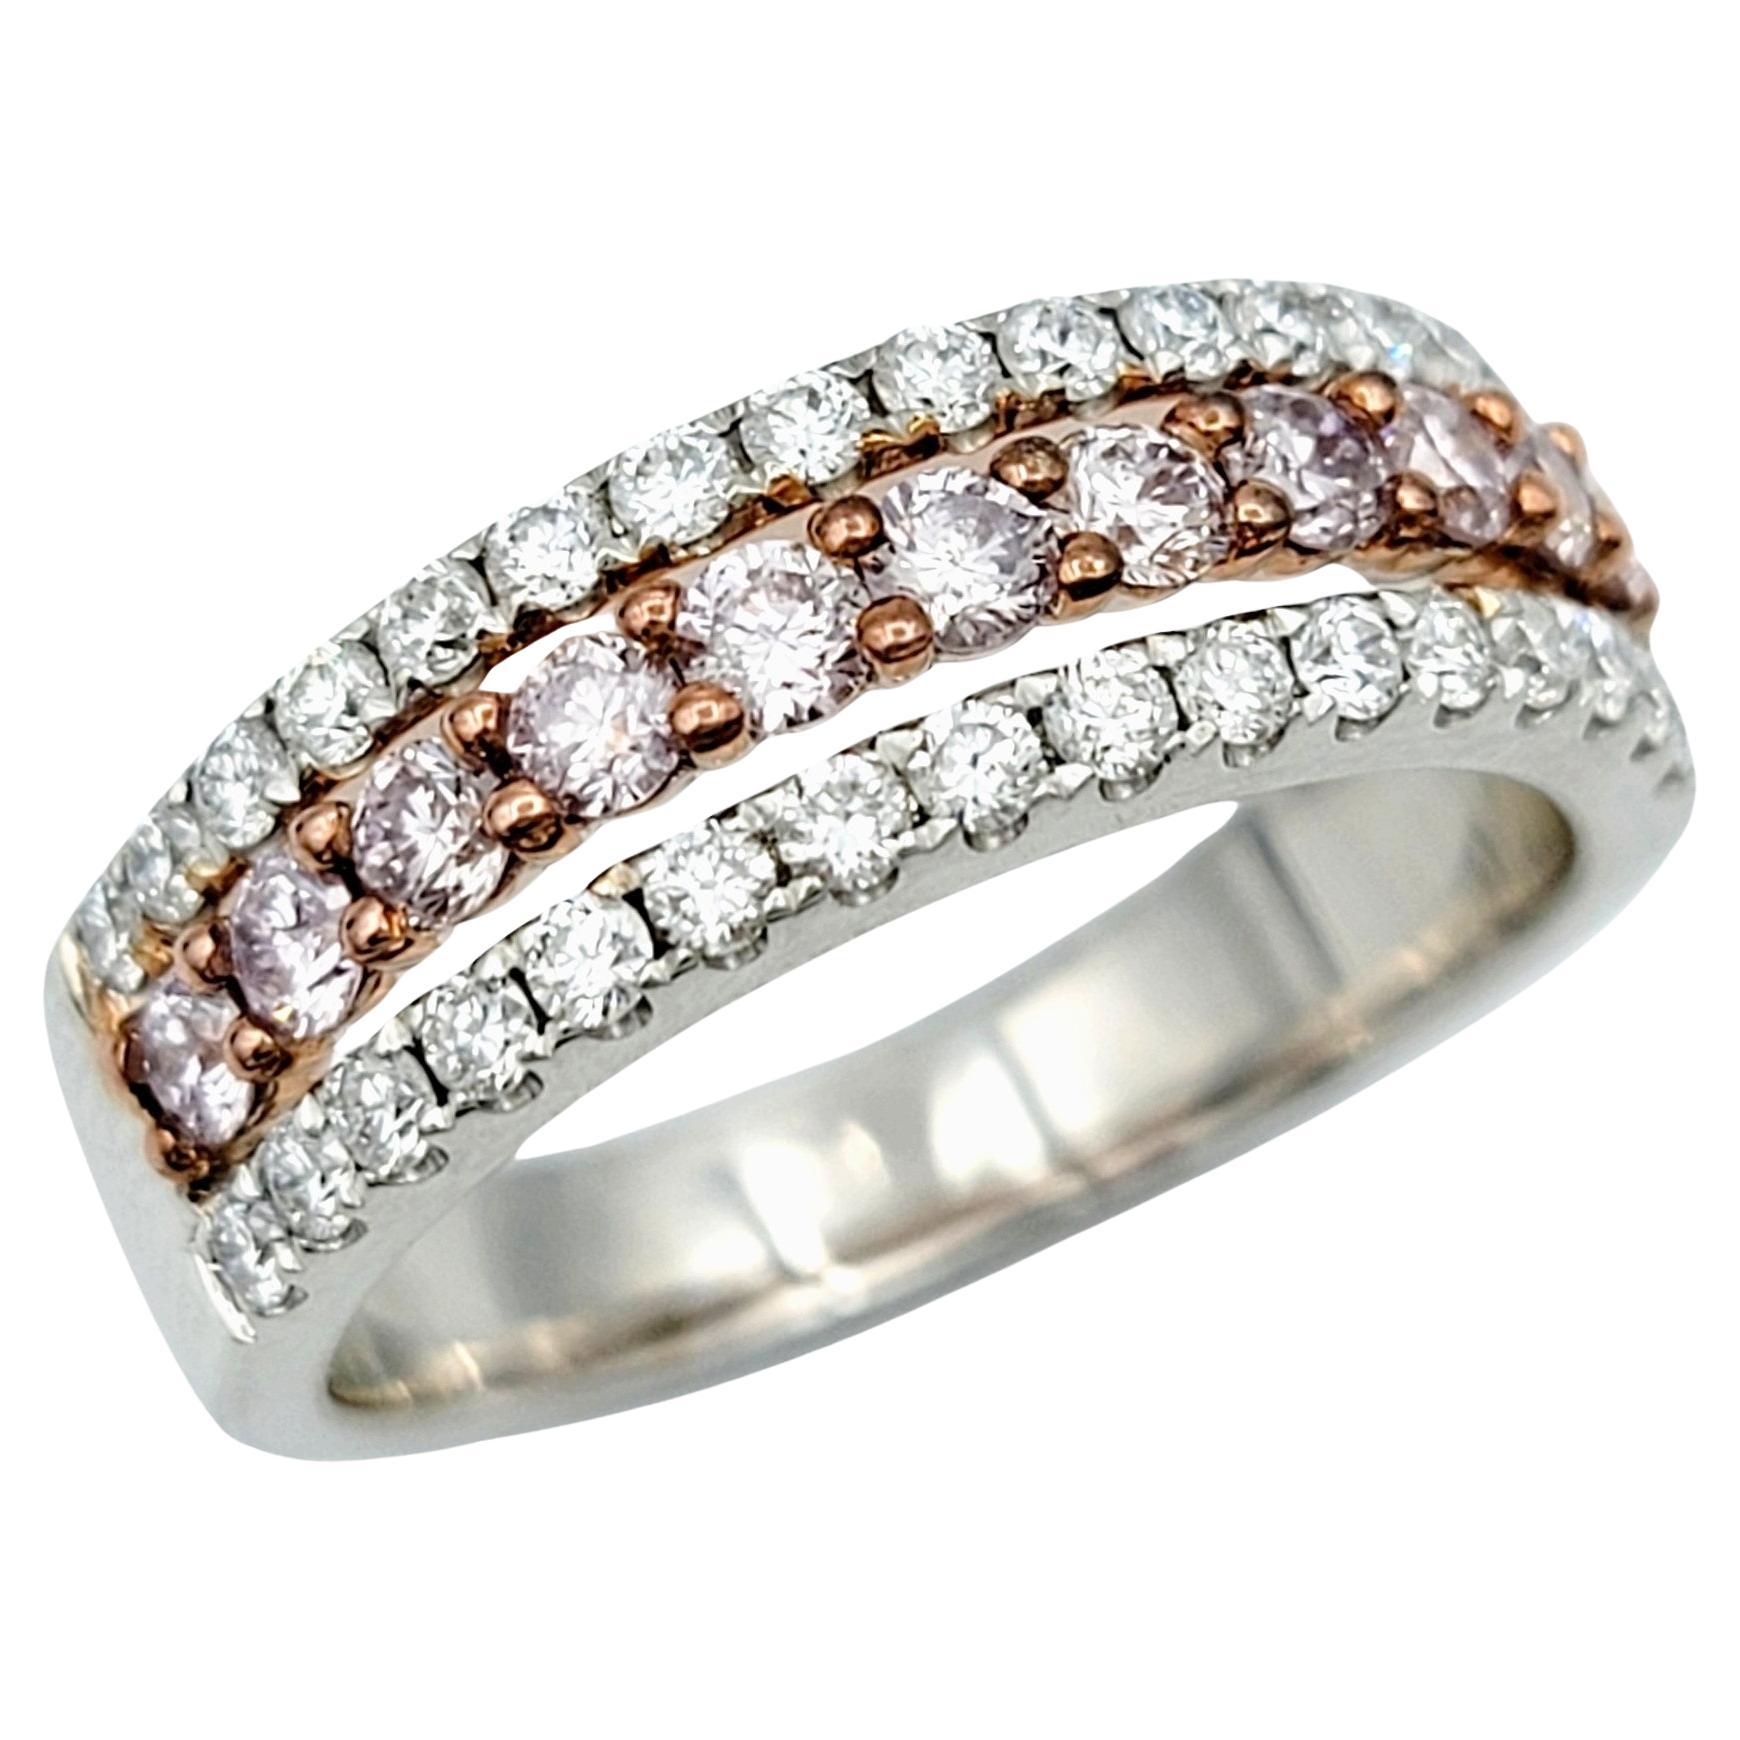 Pink and White Pave Diamond Triple Row Semi-Eternity Band Ring in 18 Karat Gold